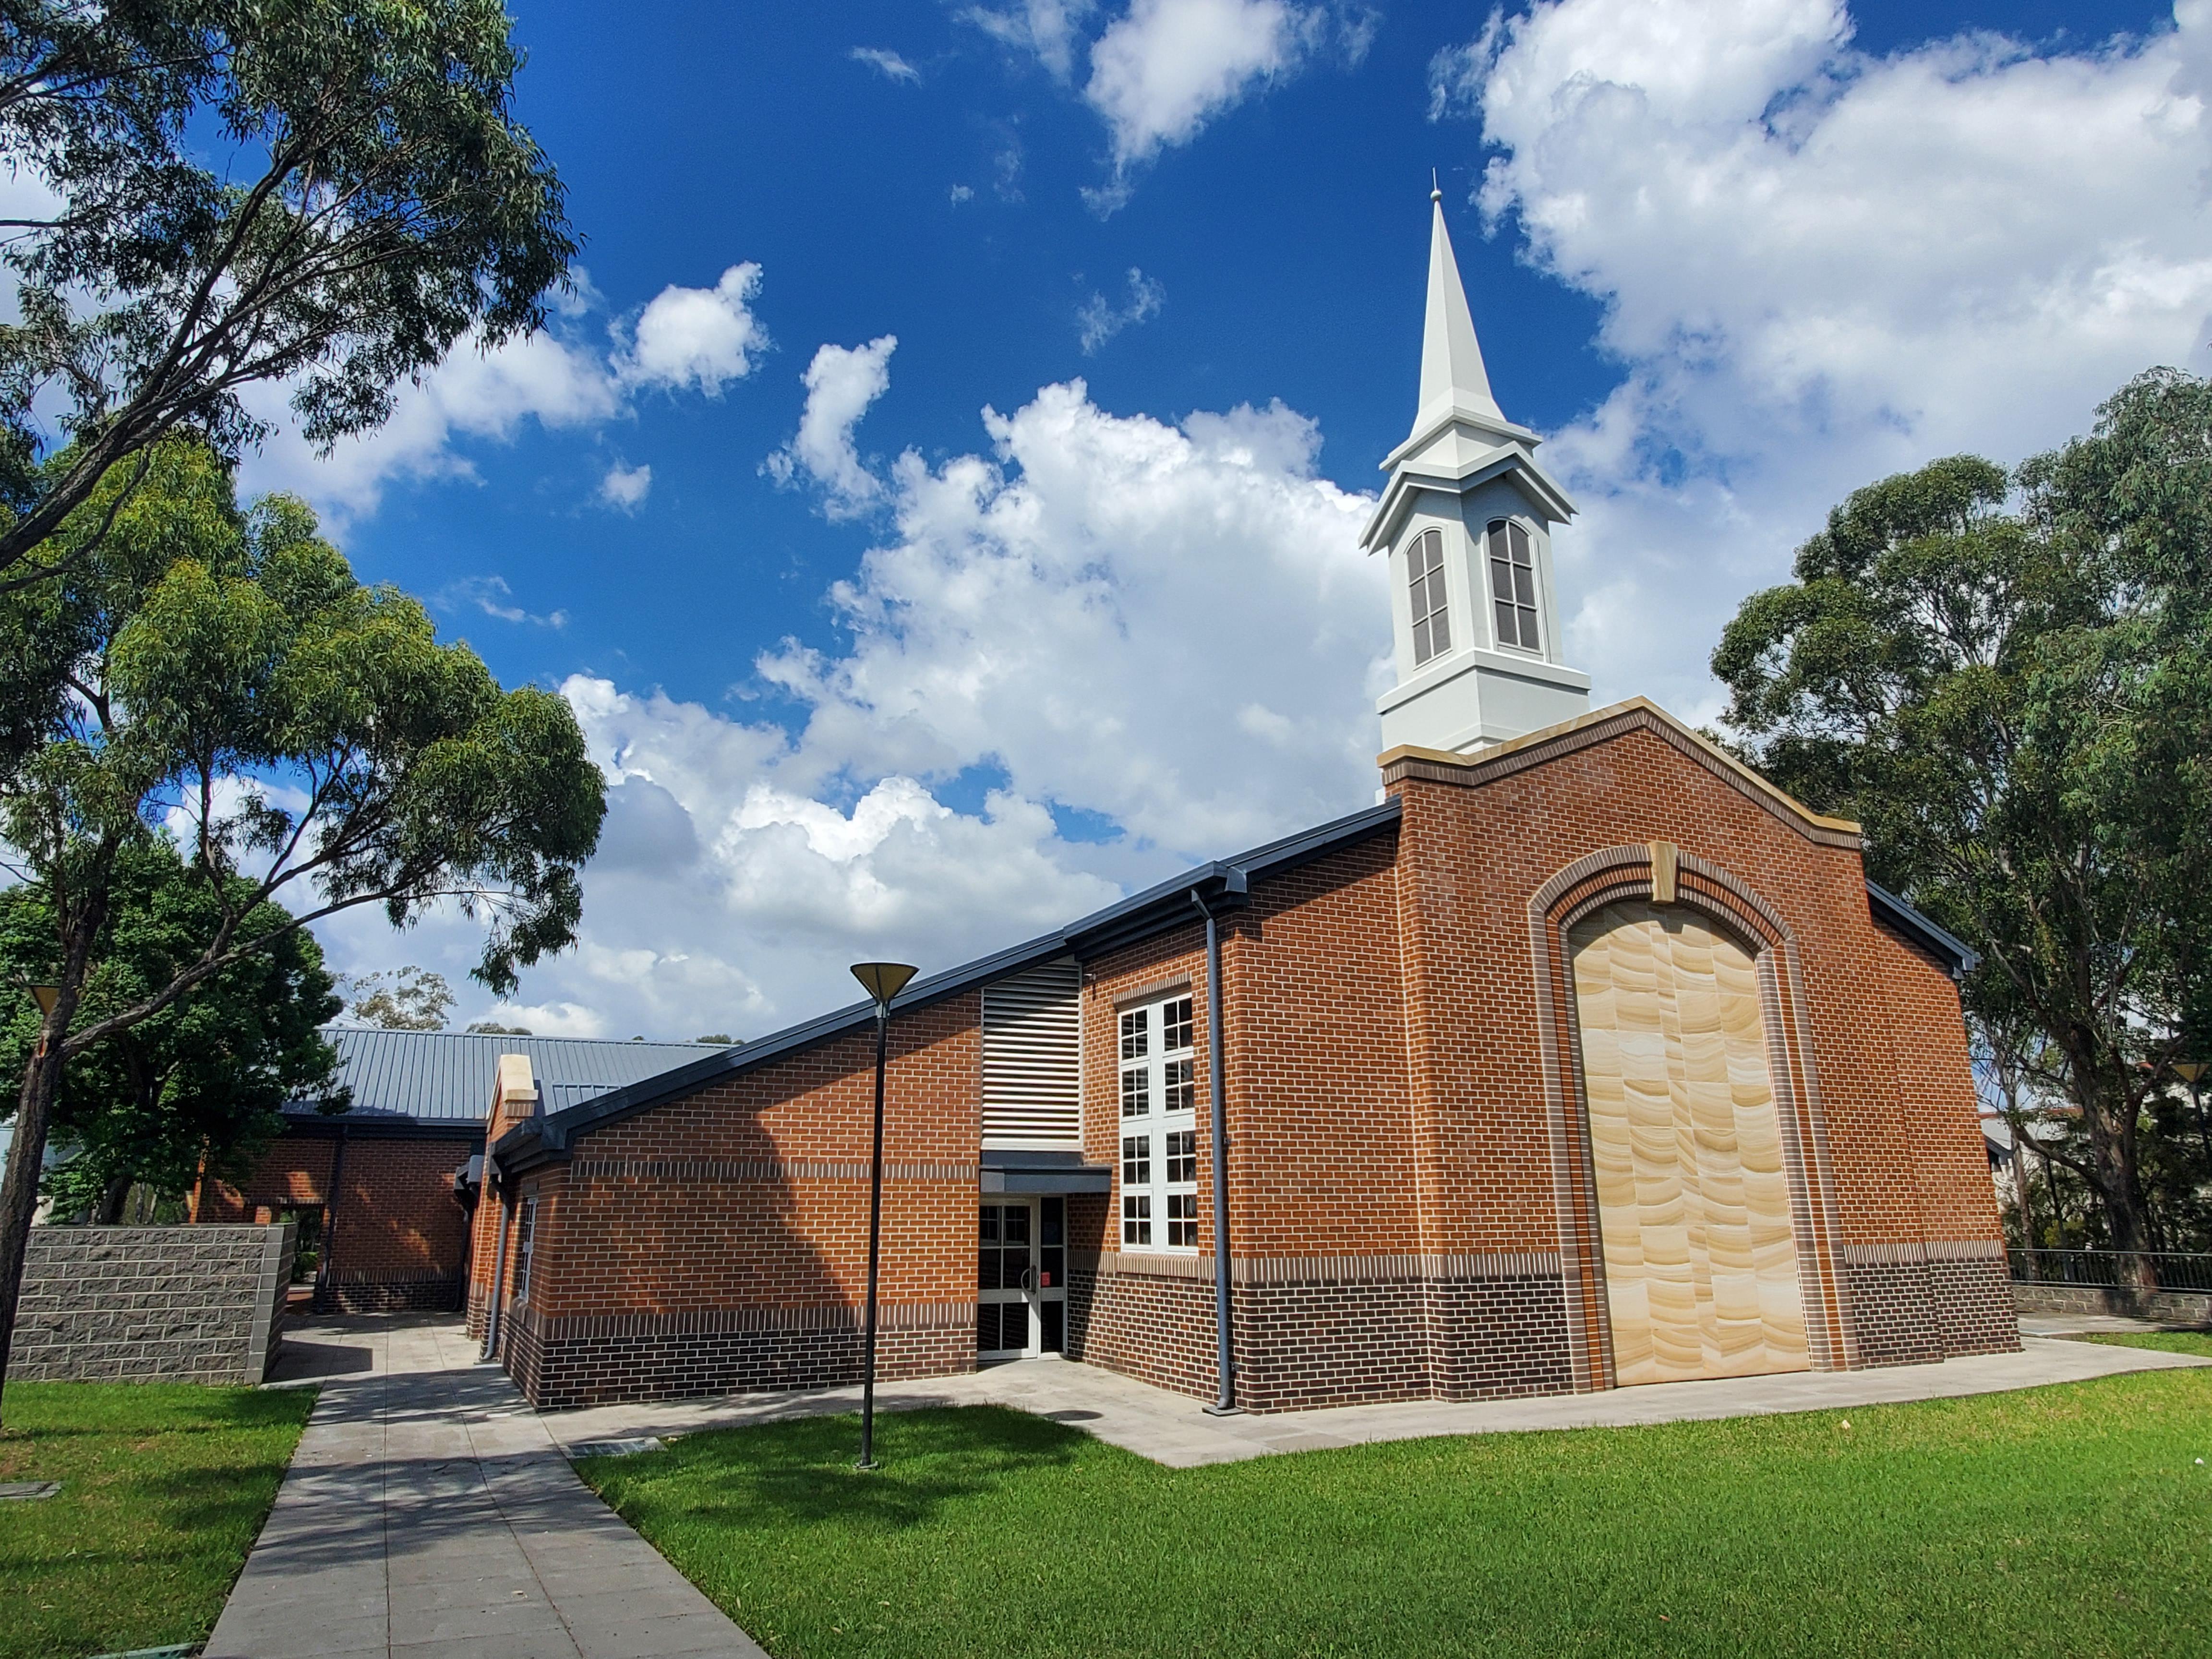 The Church of Jesus Christ of Latter-day Saints Villawood 0415 887 805